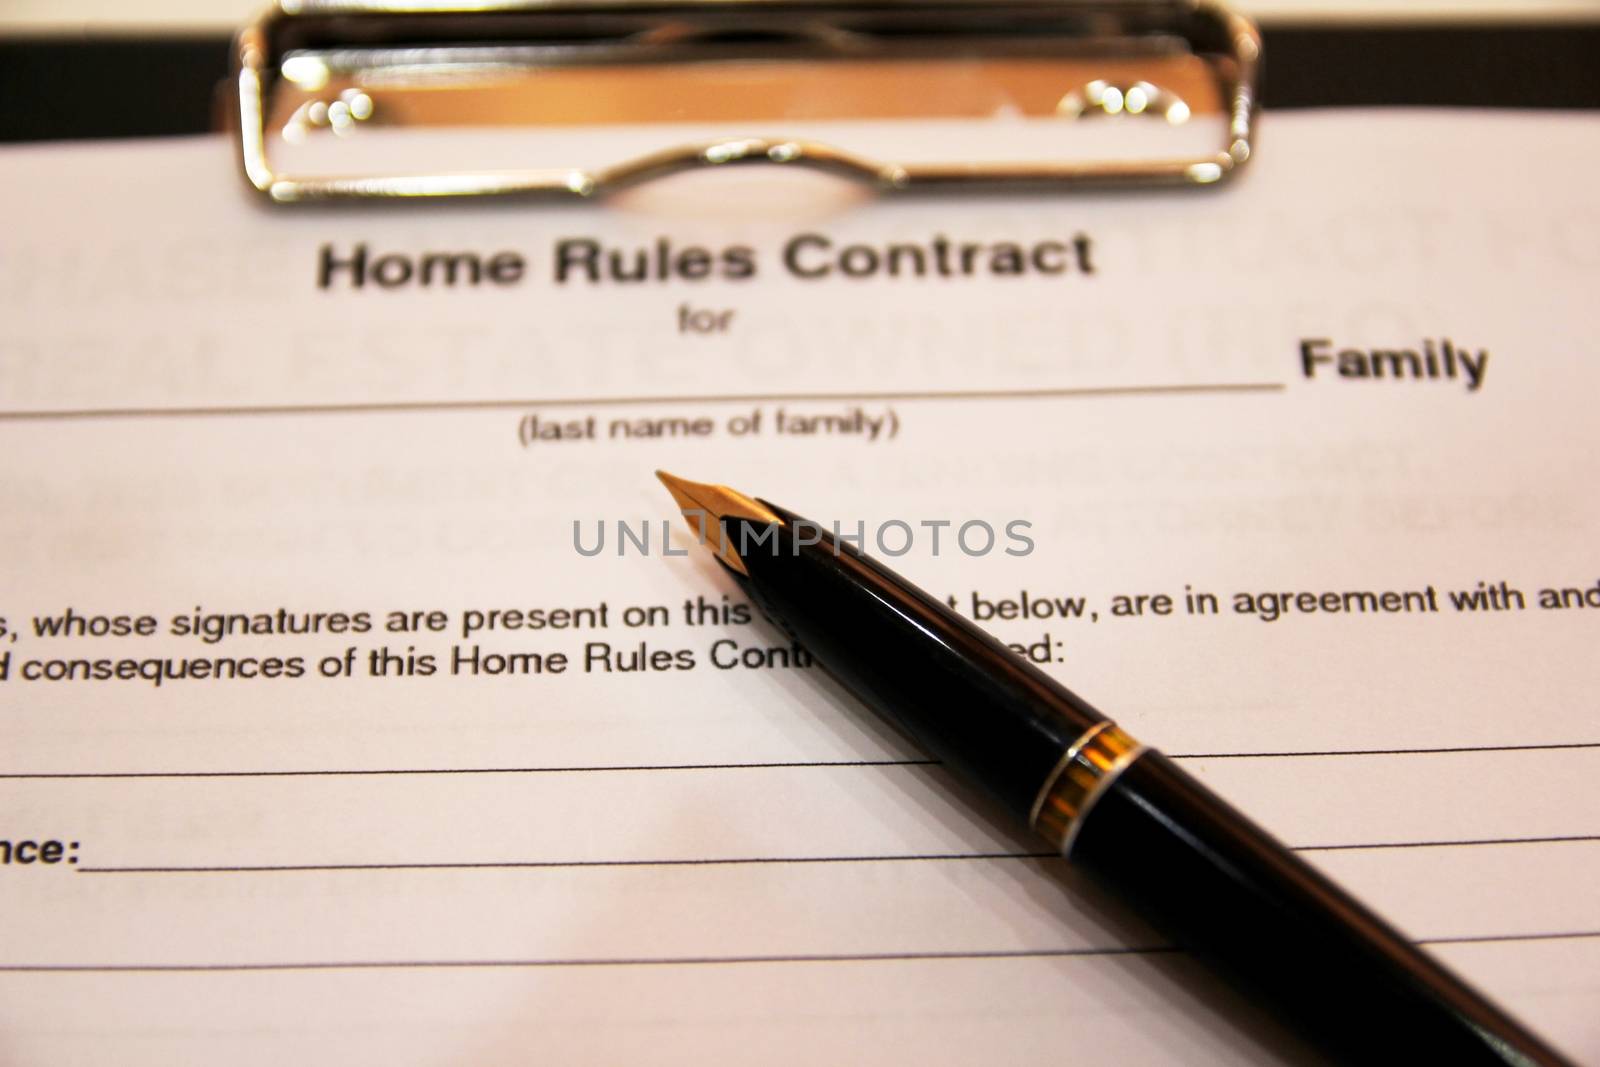 The form of the contract with a black pen on a white background